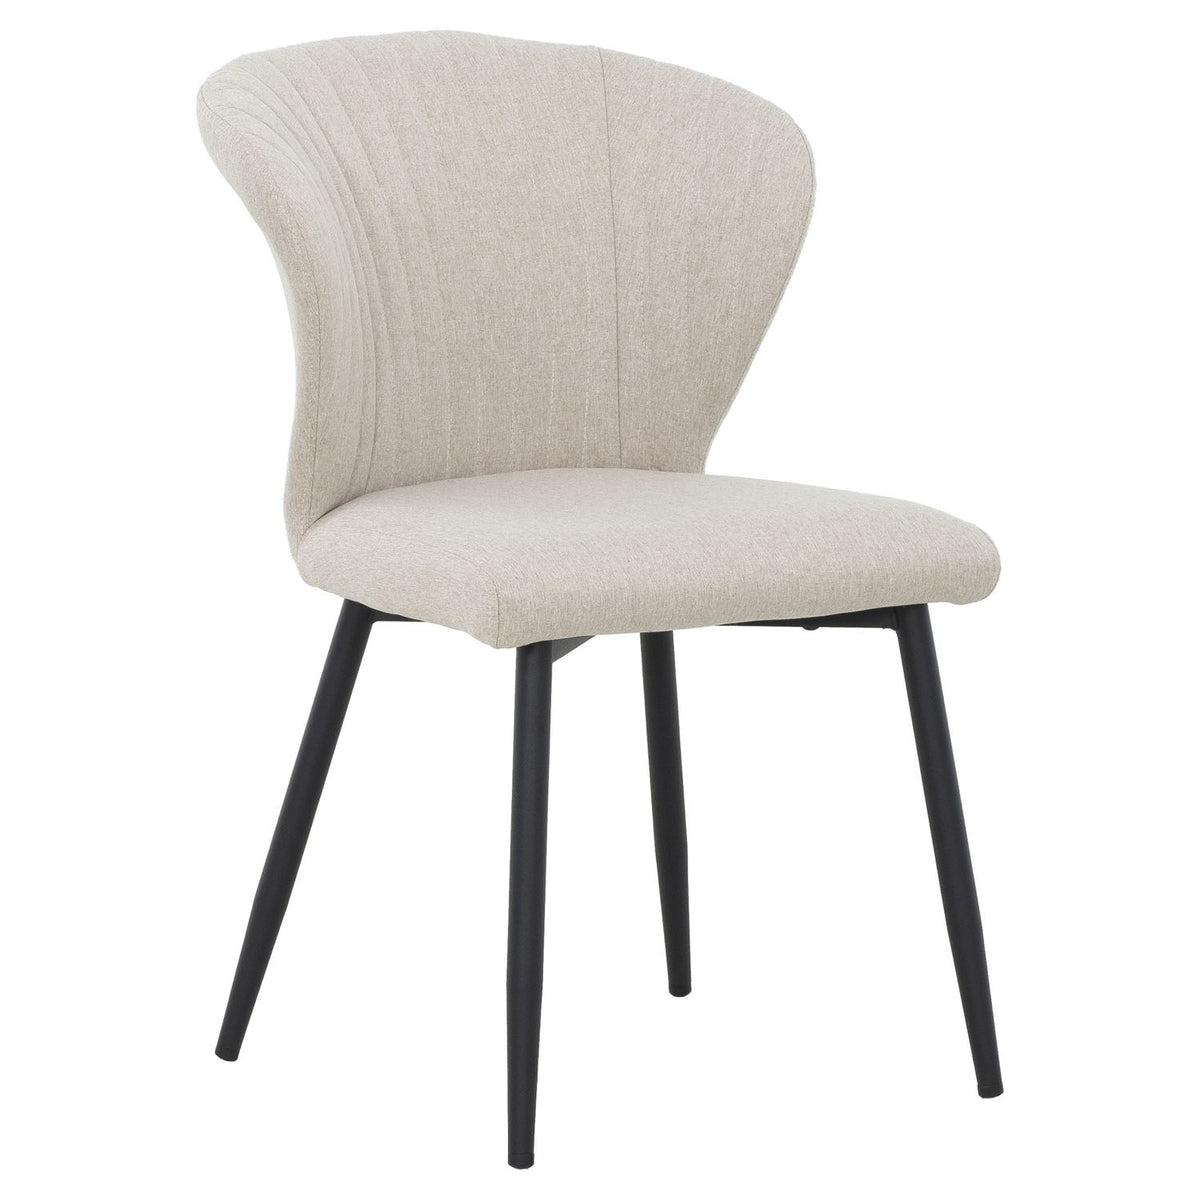 Oat Dining Chair - MJM Furniture